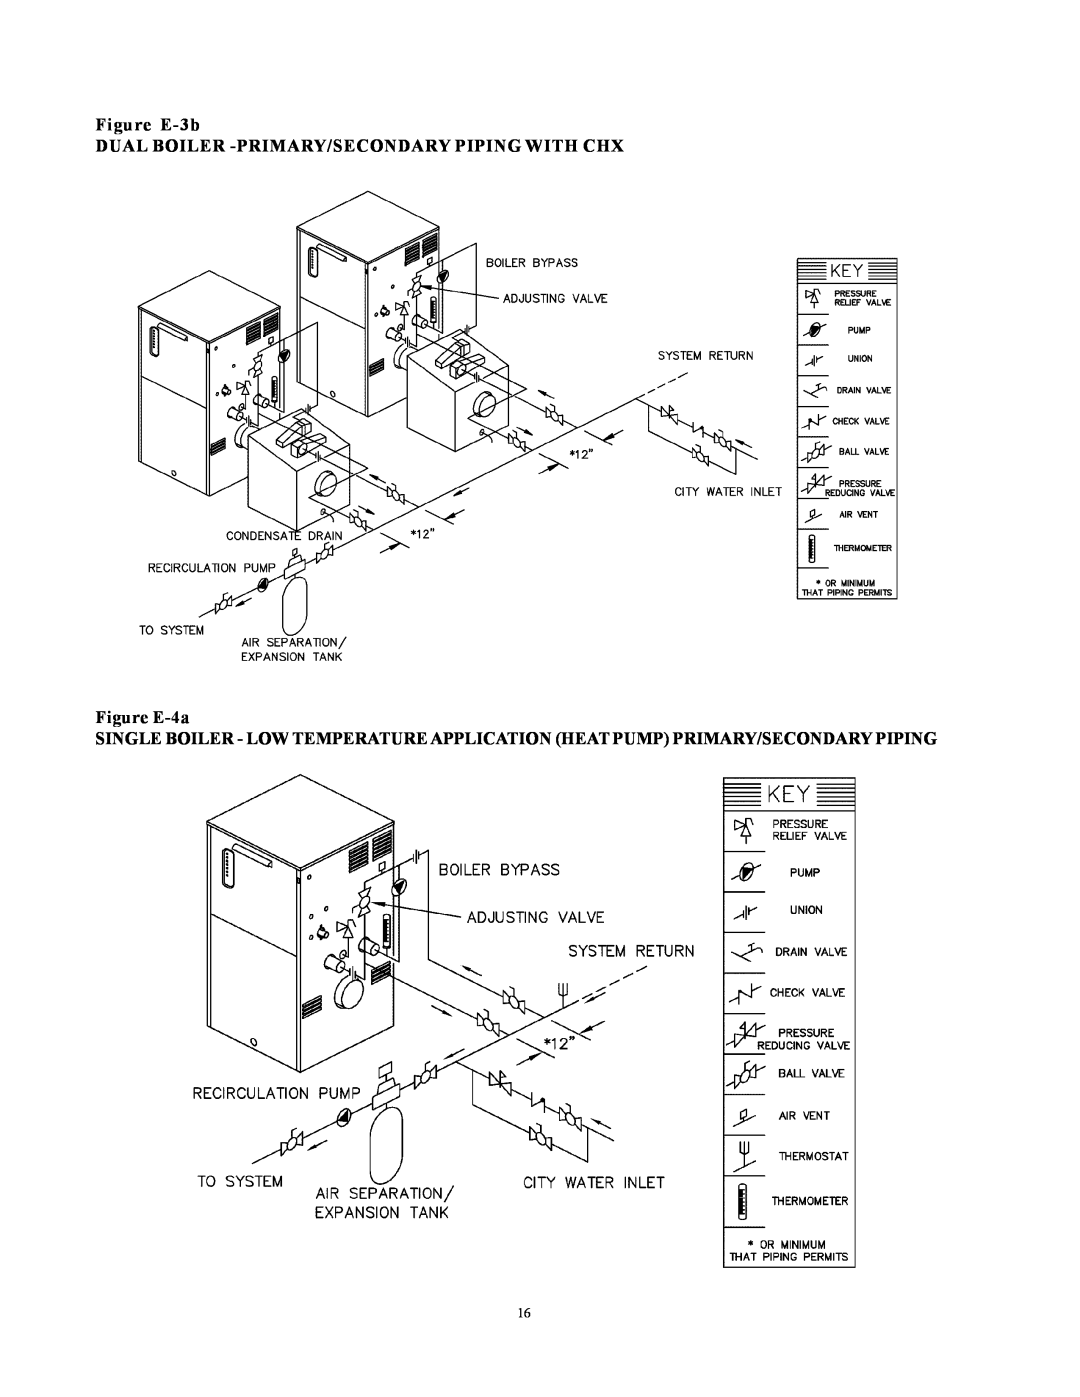 Raypak 750, 500, 1000 installation instructions Figure E-3b, Dual Boiler -Primary/Secondarypiping With Chx, Figure E-4a 